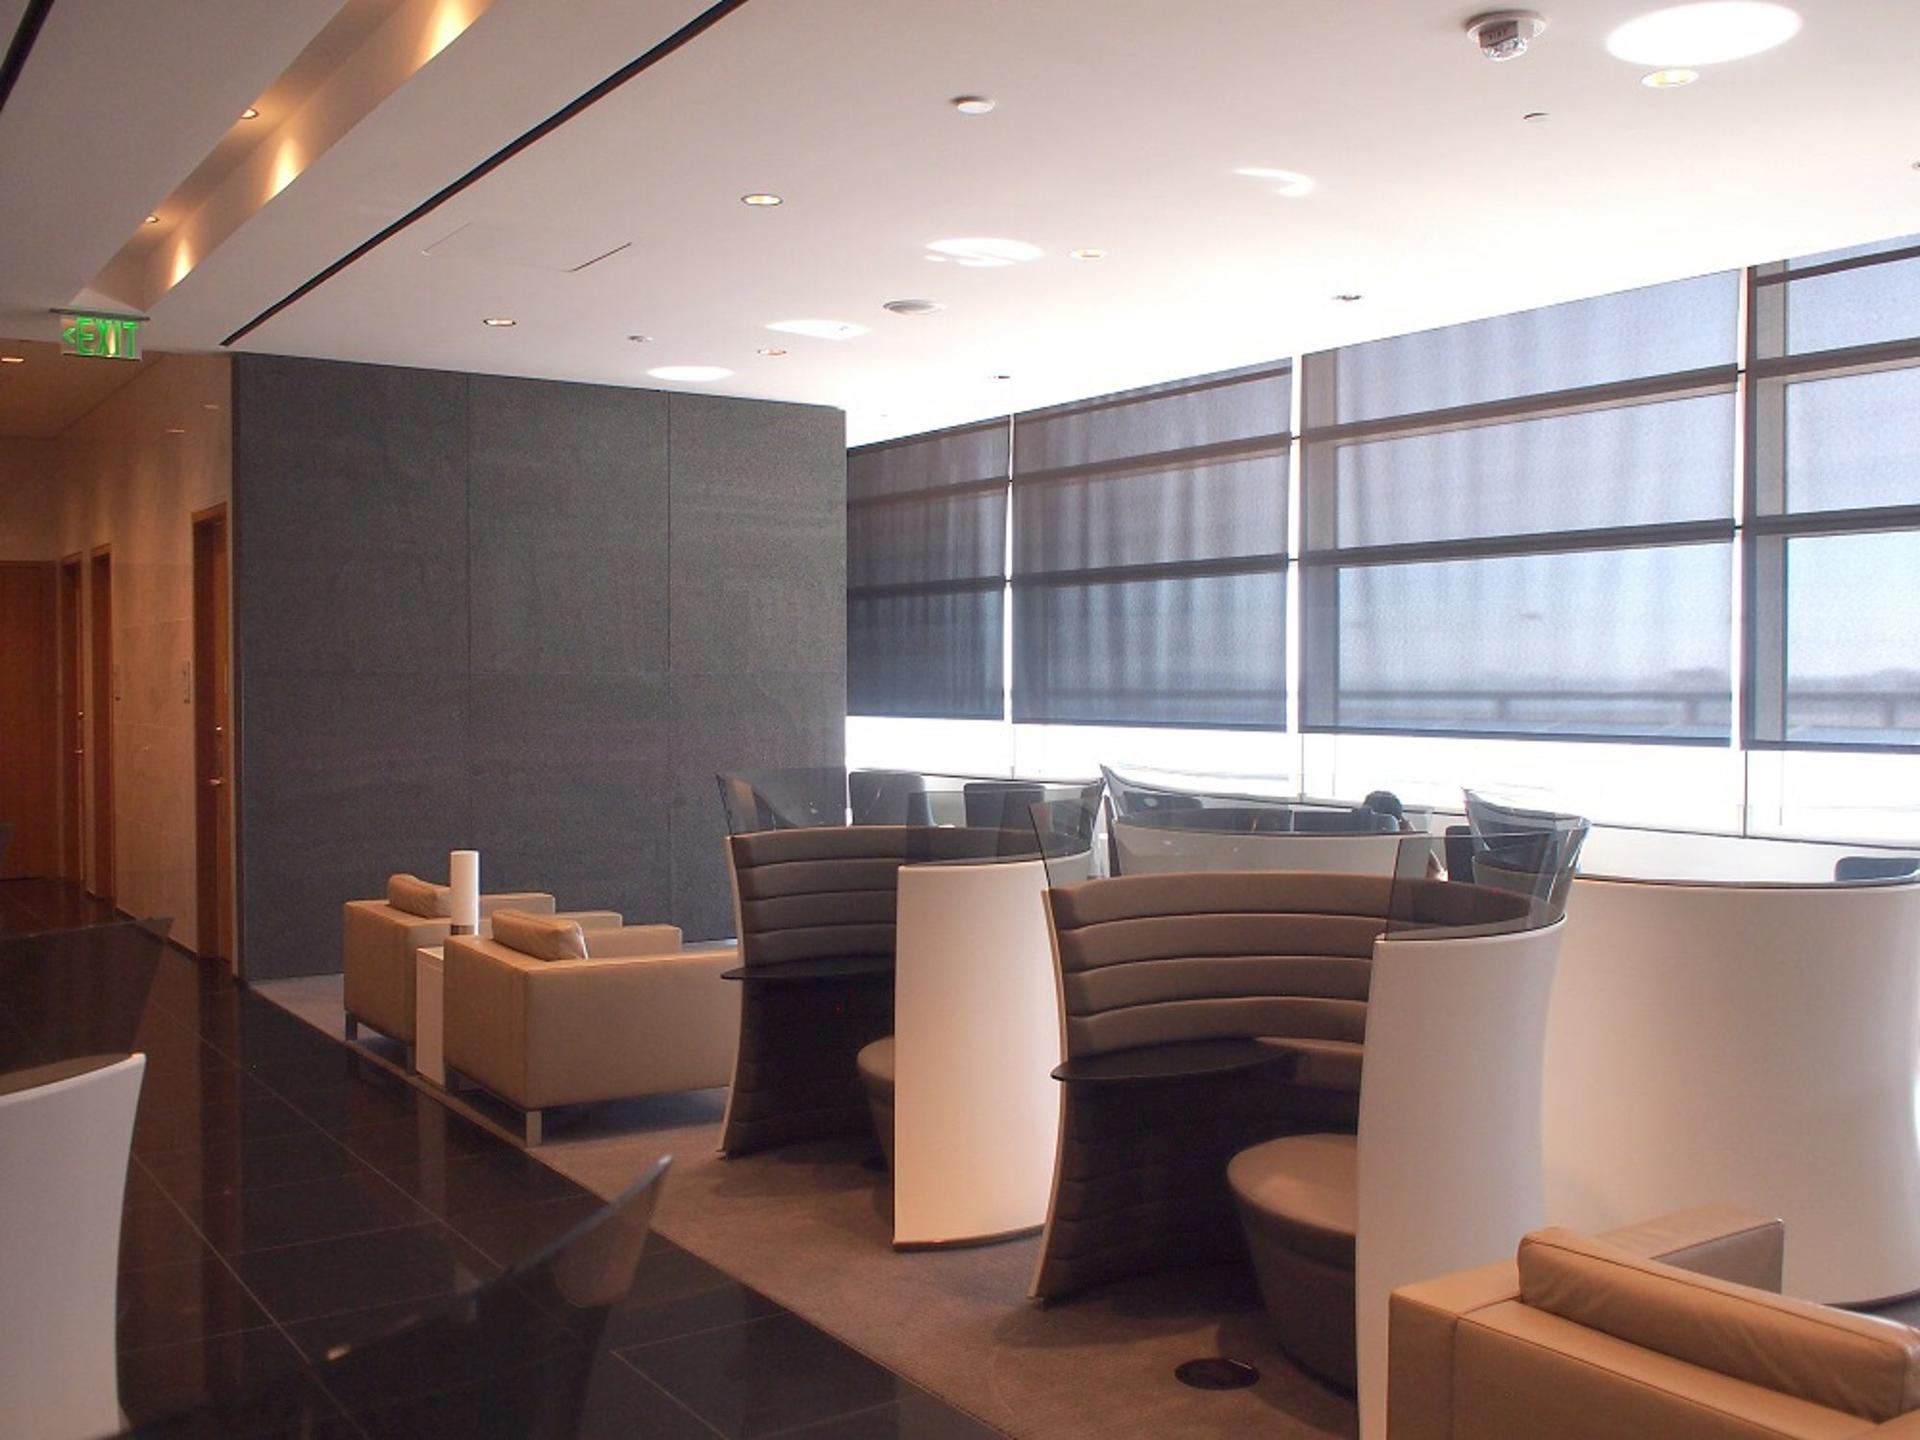 Cathay Pacific First and Business Class Lounge image 63 of 74